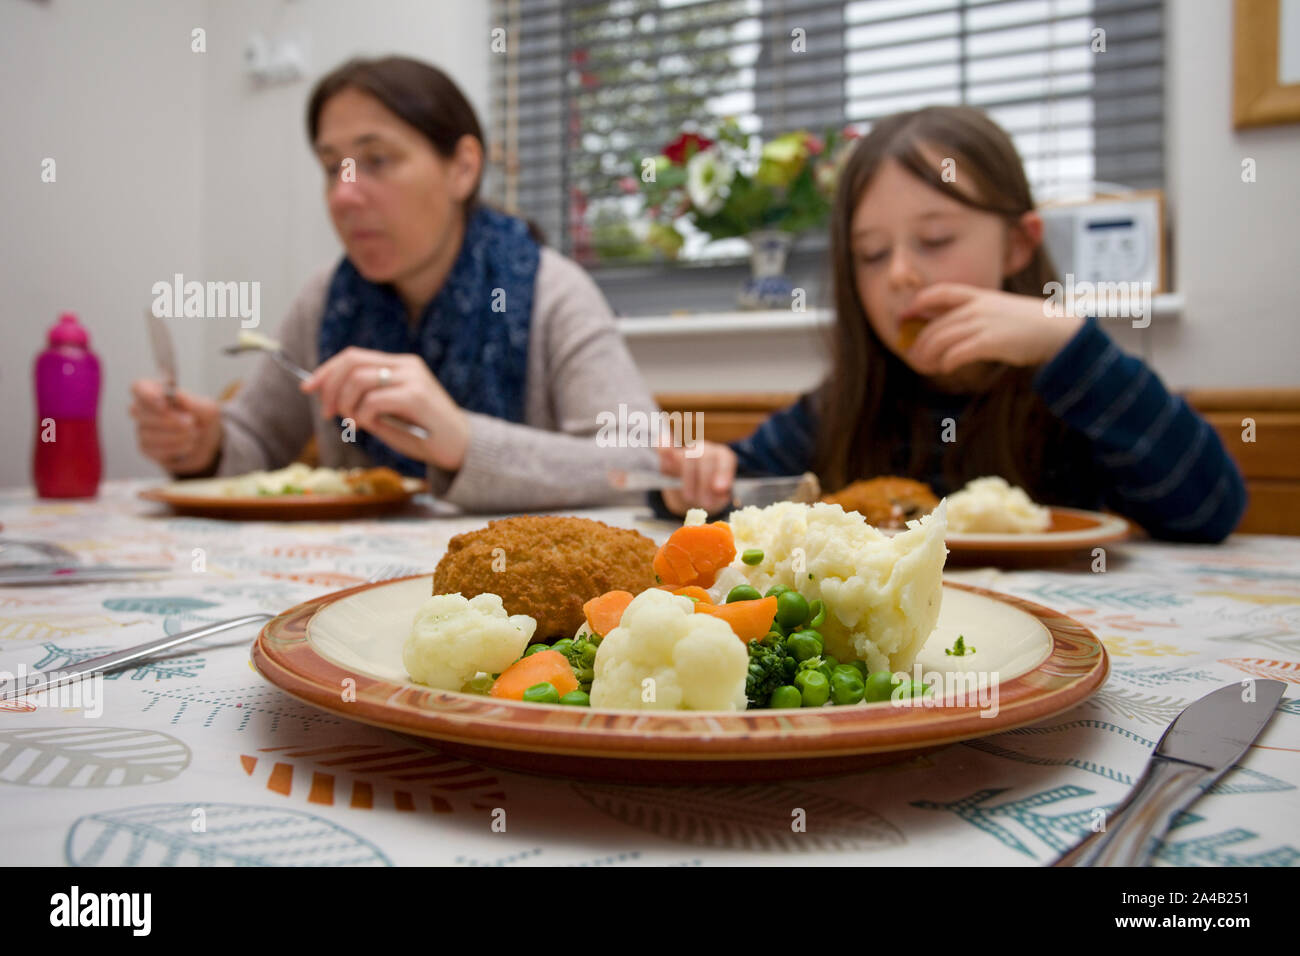 Family eating food at the kitchen table Stock Photo